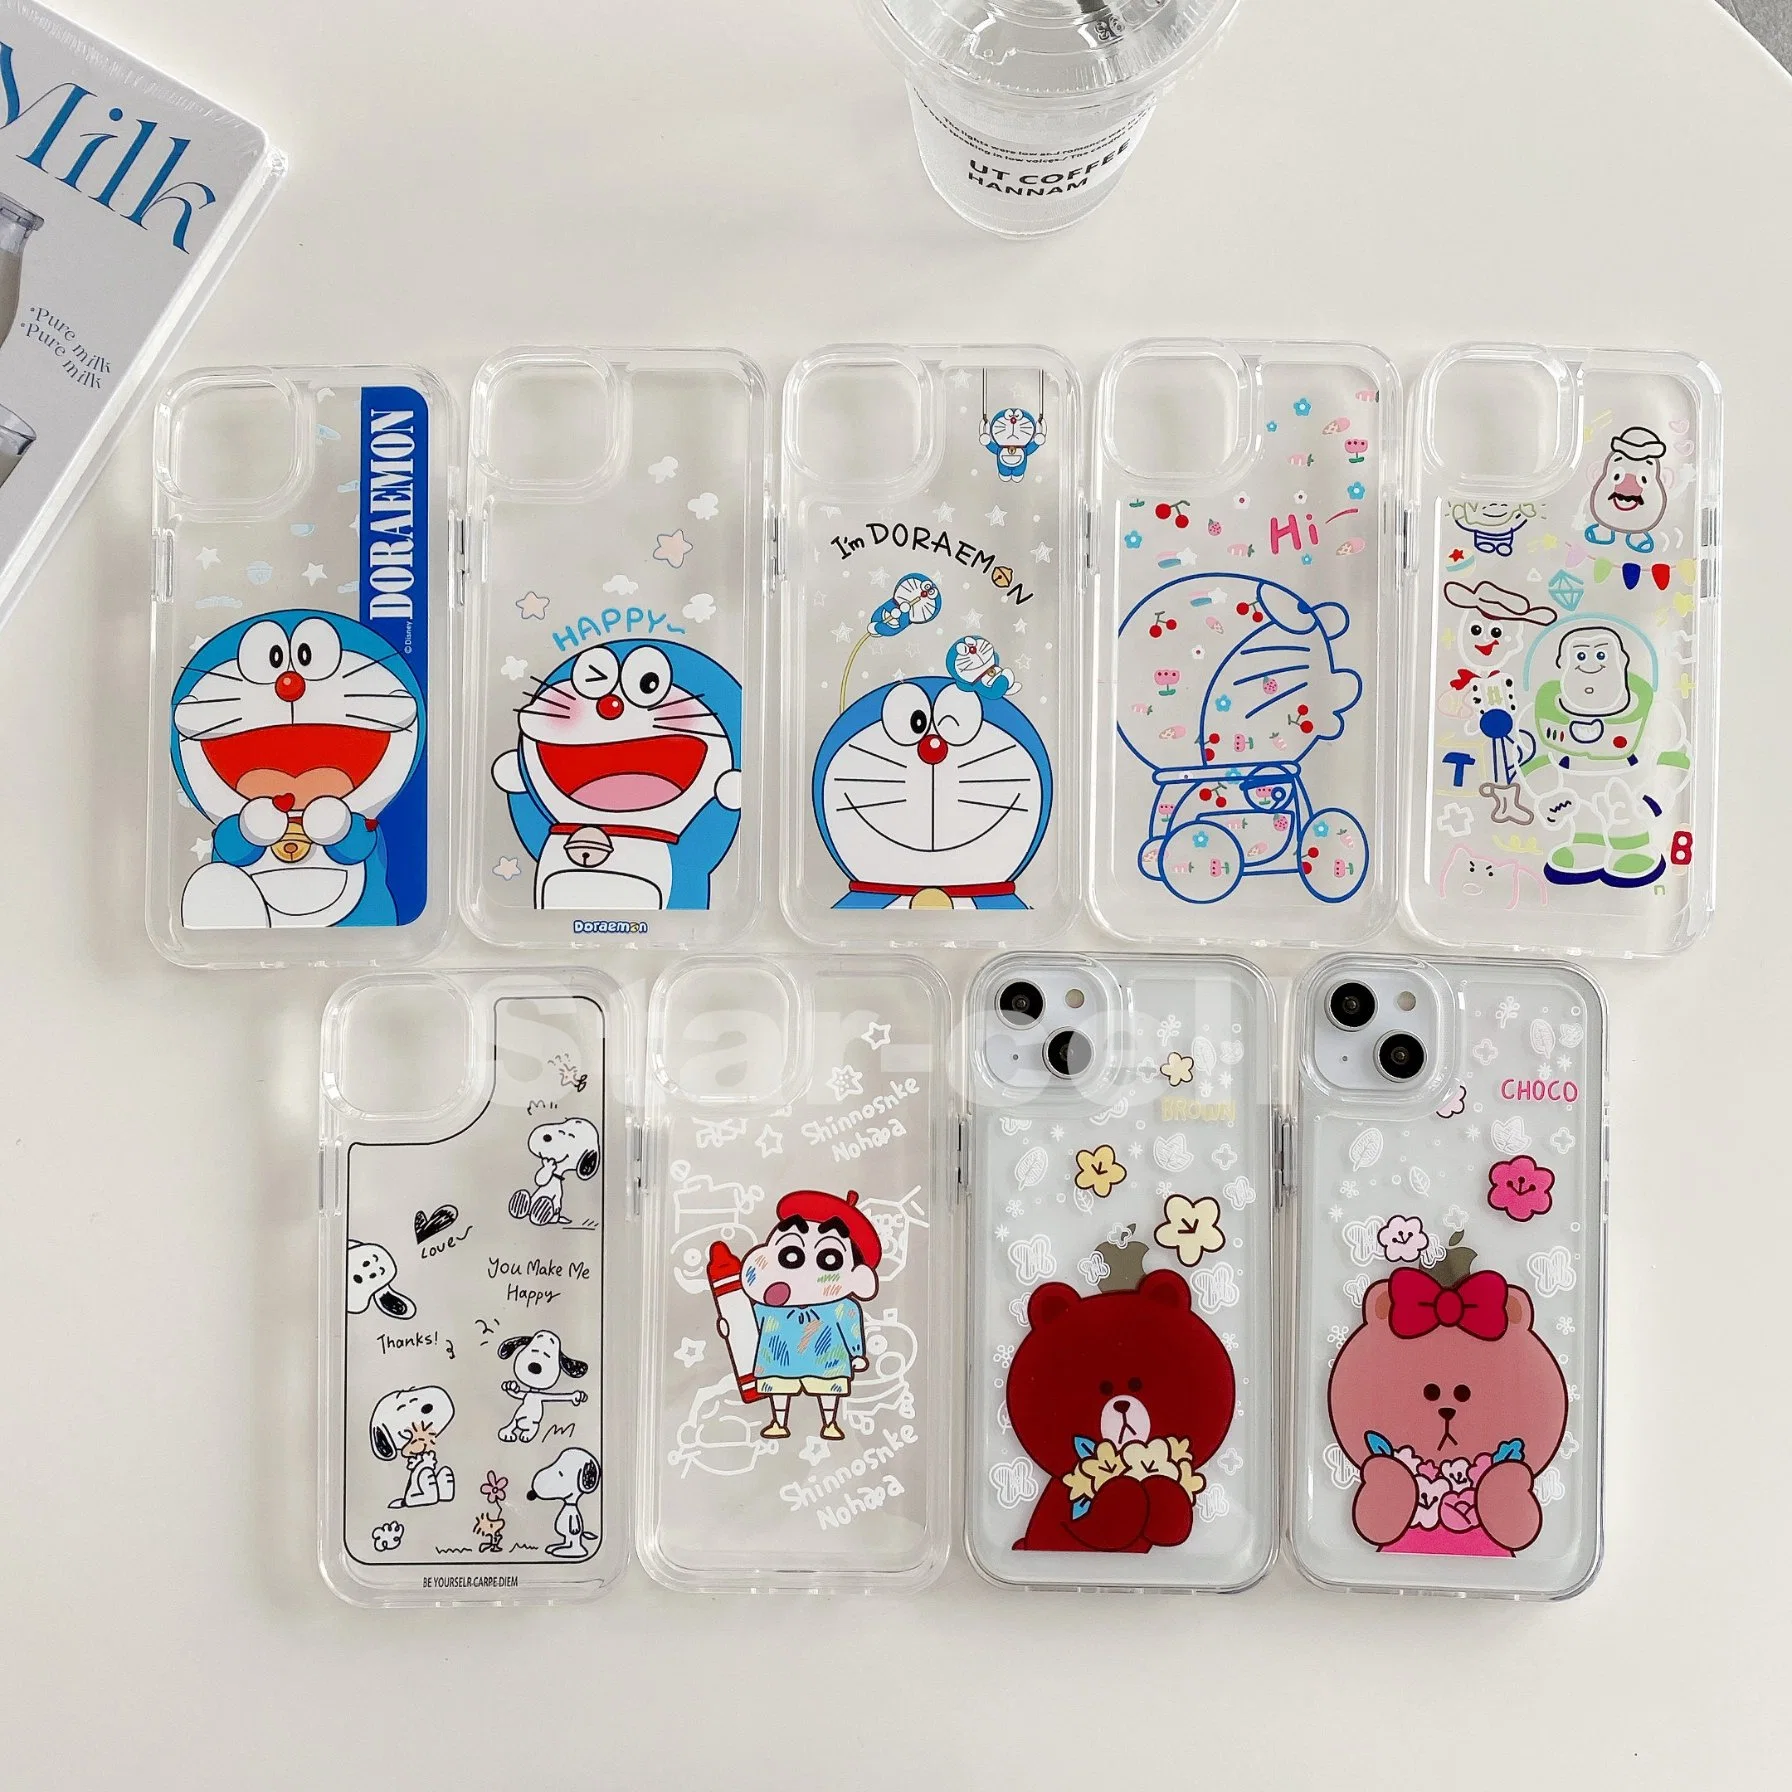 New High Quality Design Cute Phone Case Wholesale Price Basic Model for iPhone Case Cell Phone Accessories Mobile Phone Cover